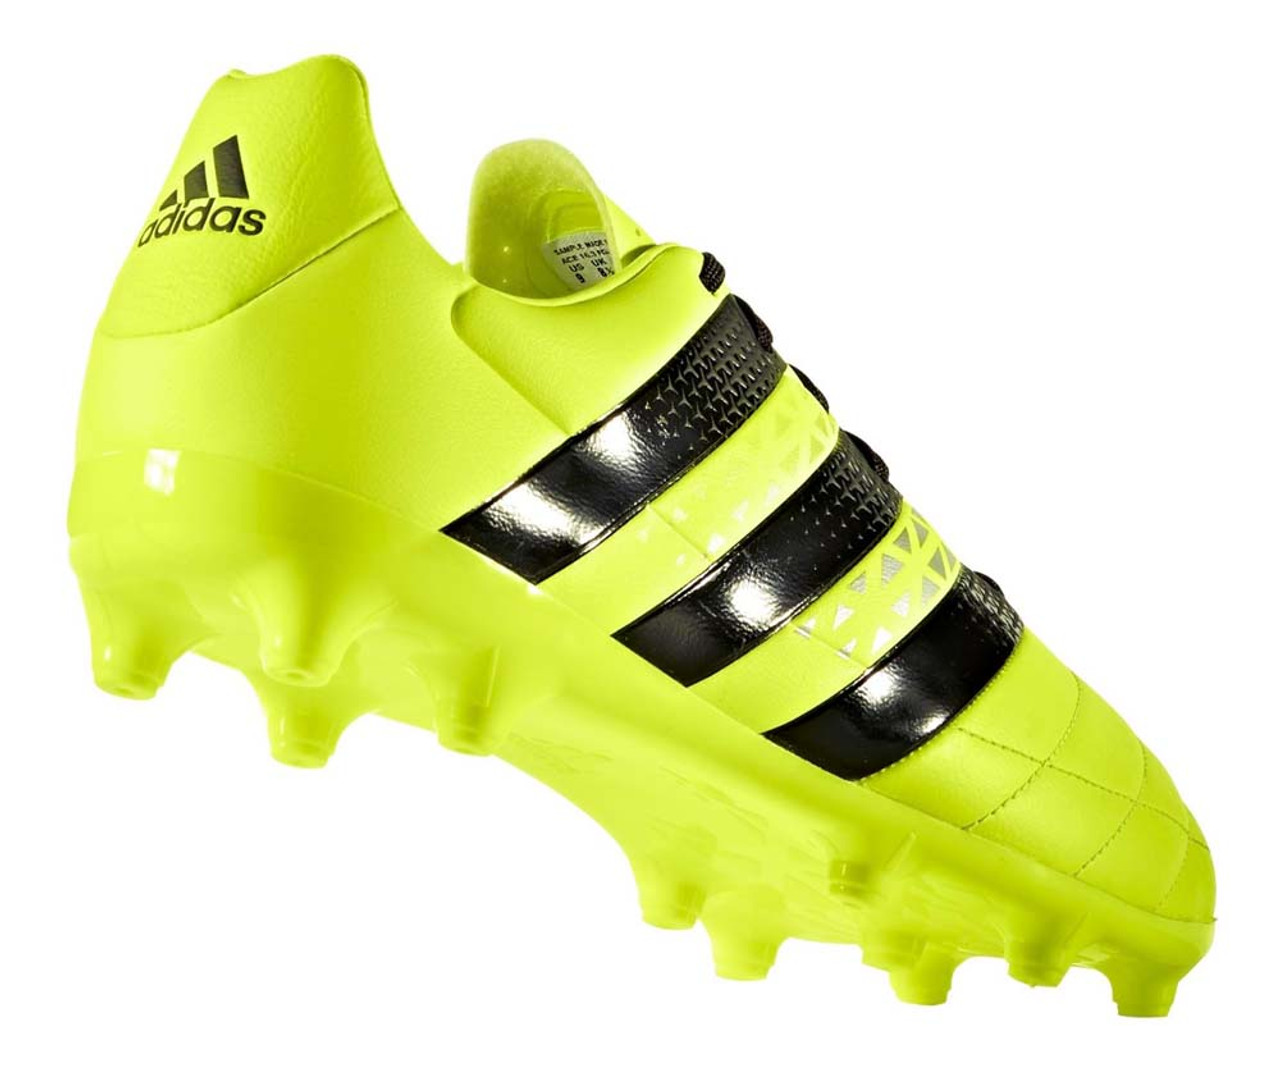 adidas ace rugby boots